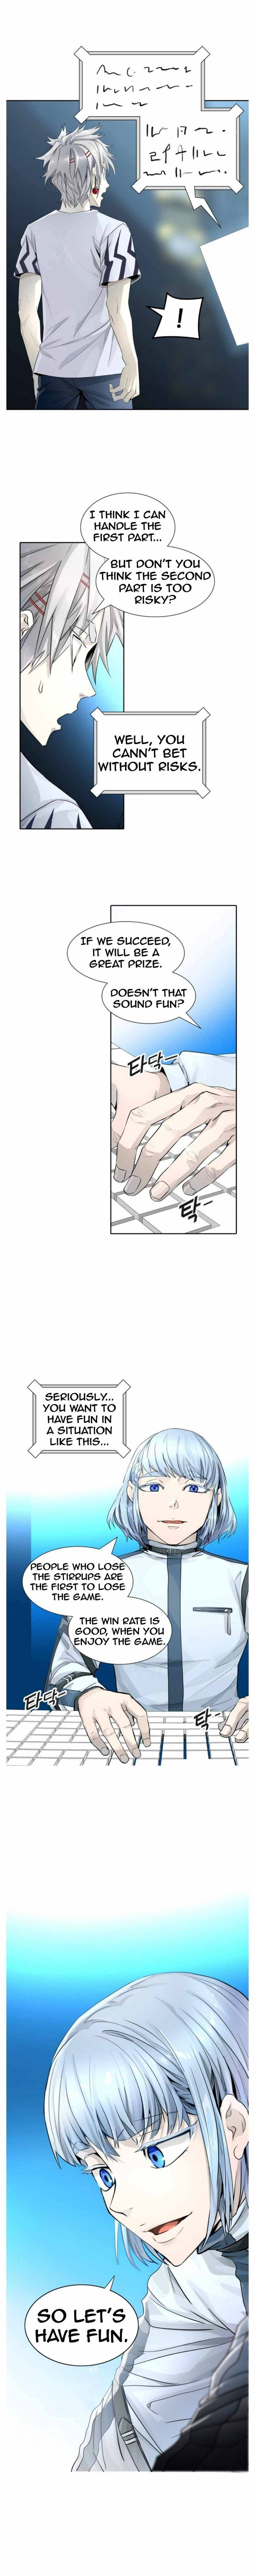 Tower of God Chapter 501 - Page 3